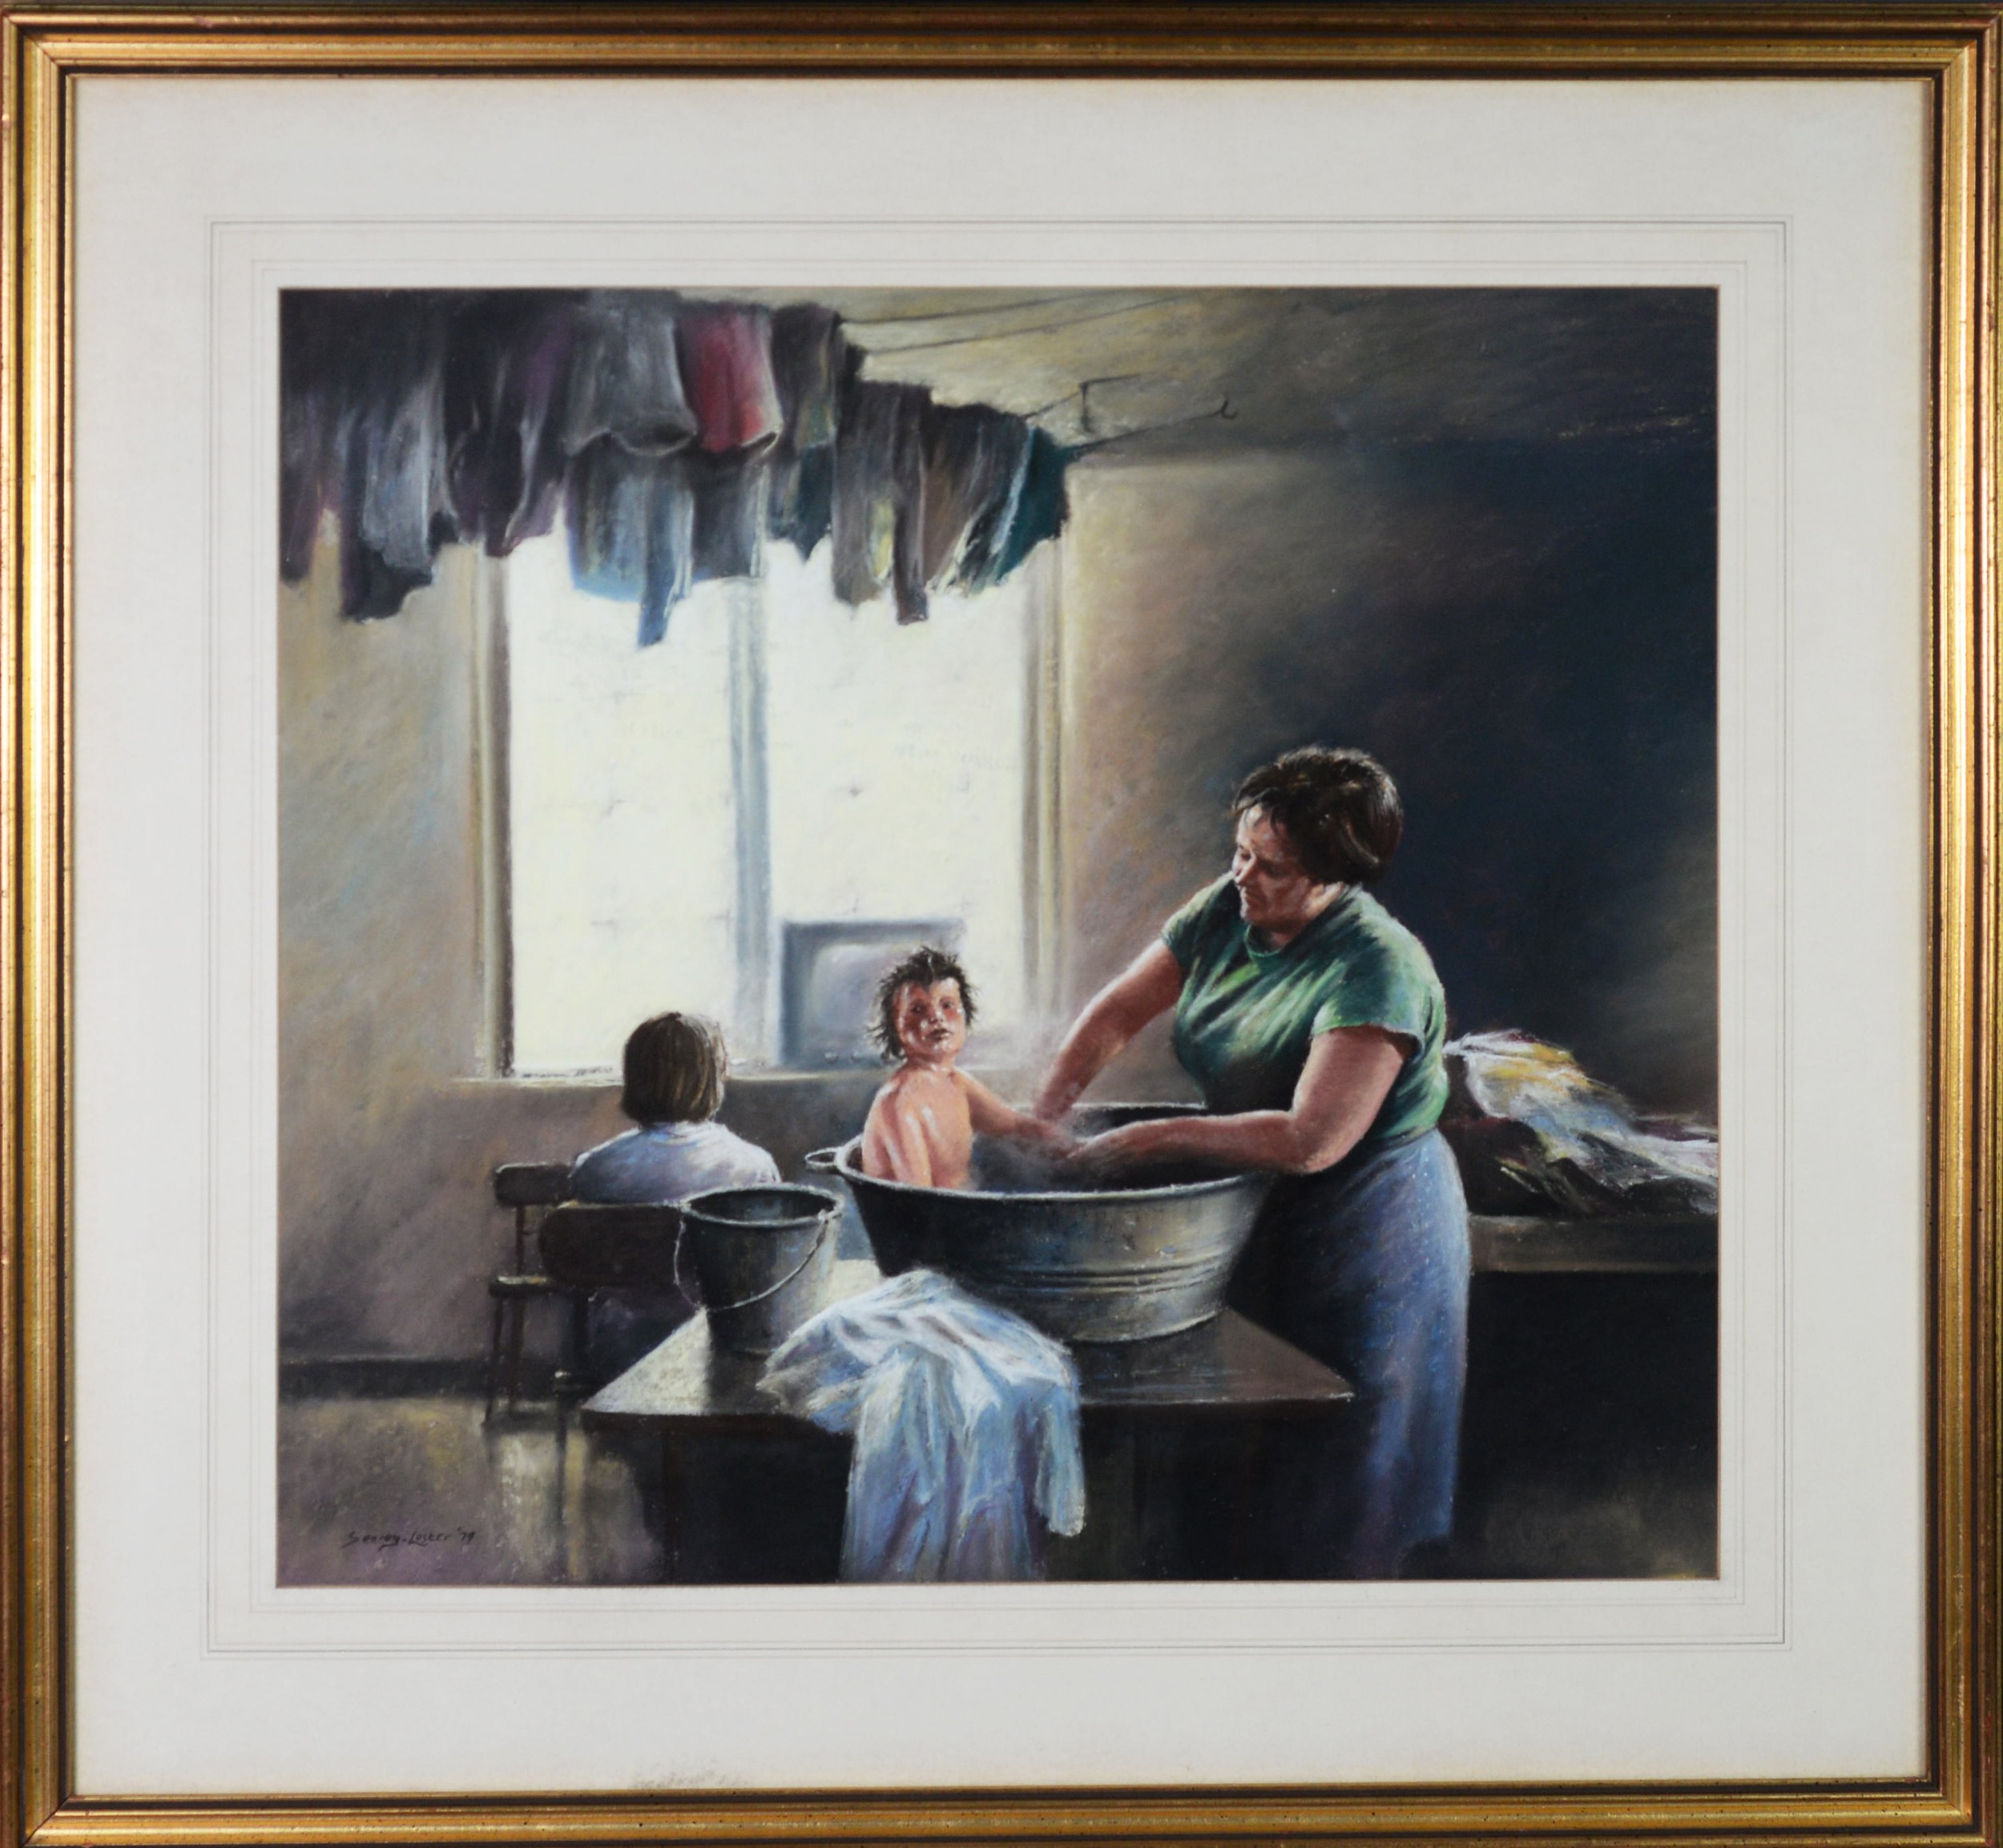 SEEREY LESTER PASTEL DRAWING Interior with woman bathing a young child in a zinc tub Signed lower - Image 2 of 2